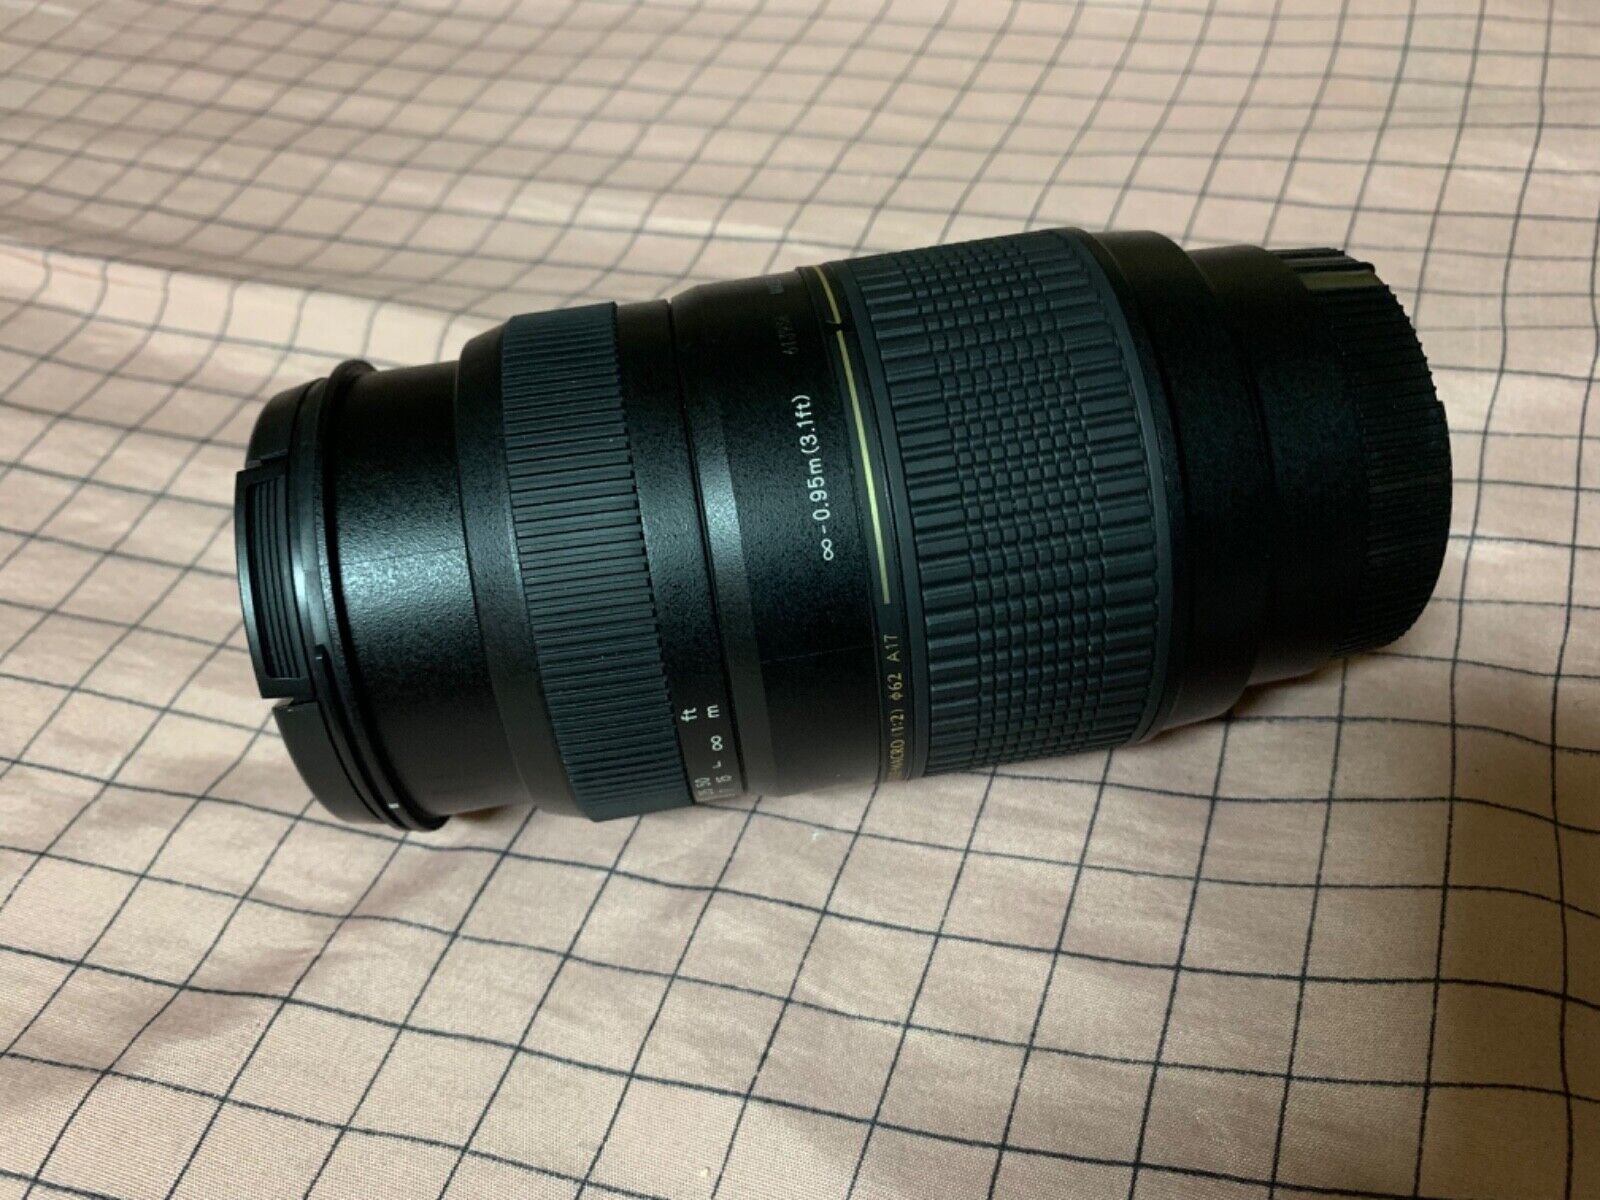 Tamron AF 70-300mm 1:4-5.6 Di LD MACRO 1:2 (For Sony) | eBay